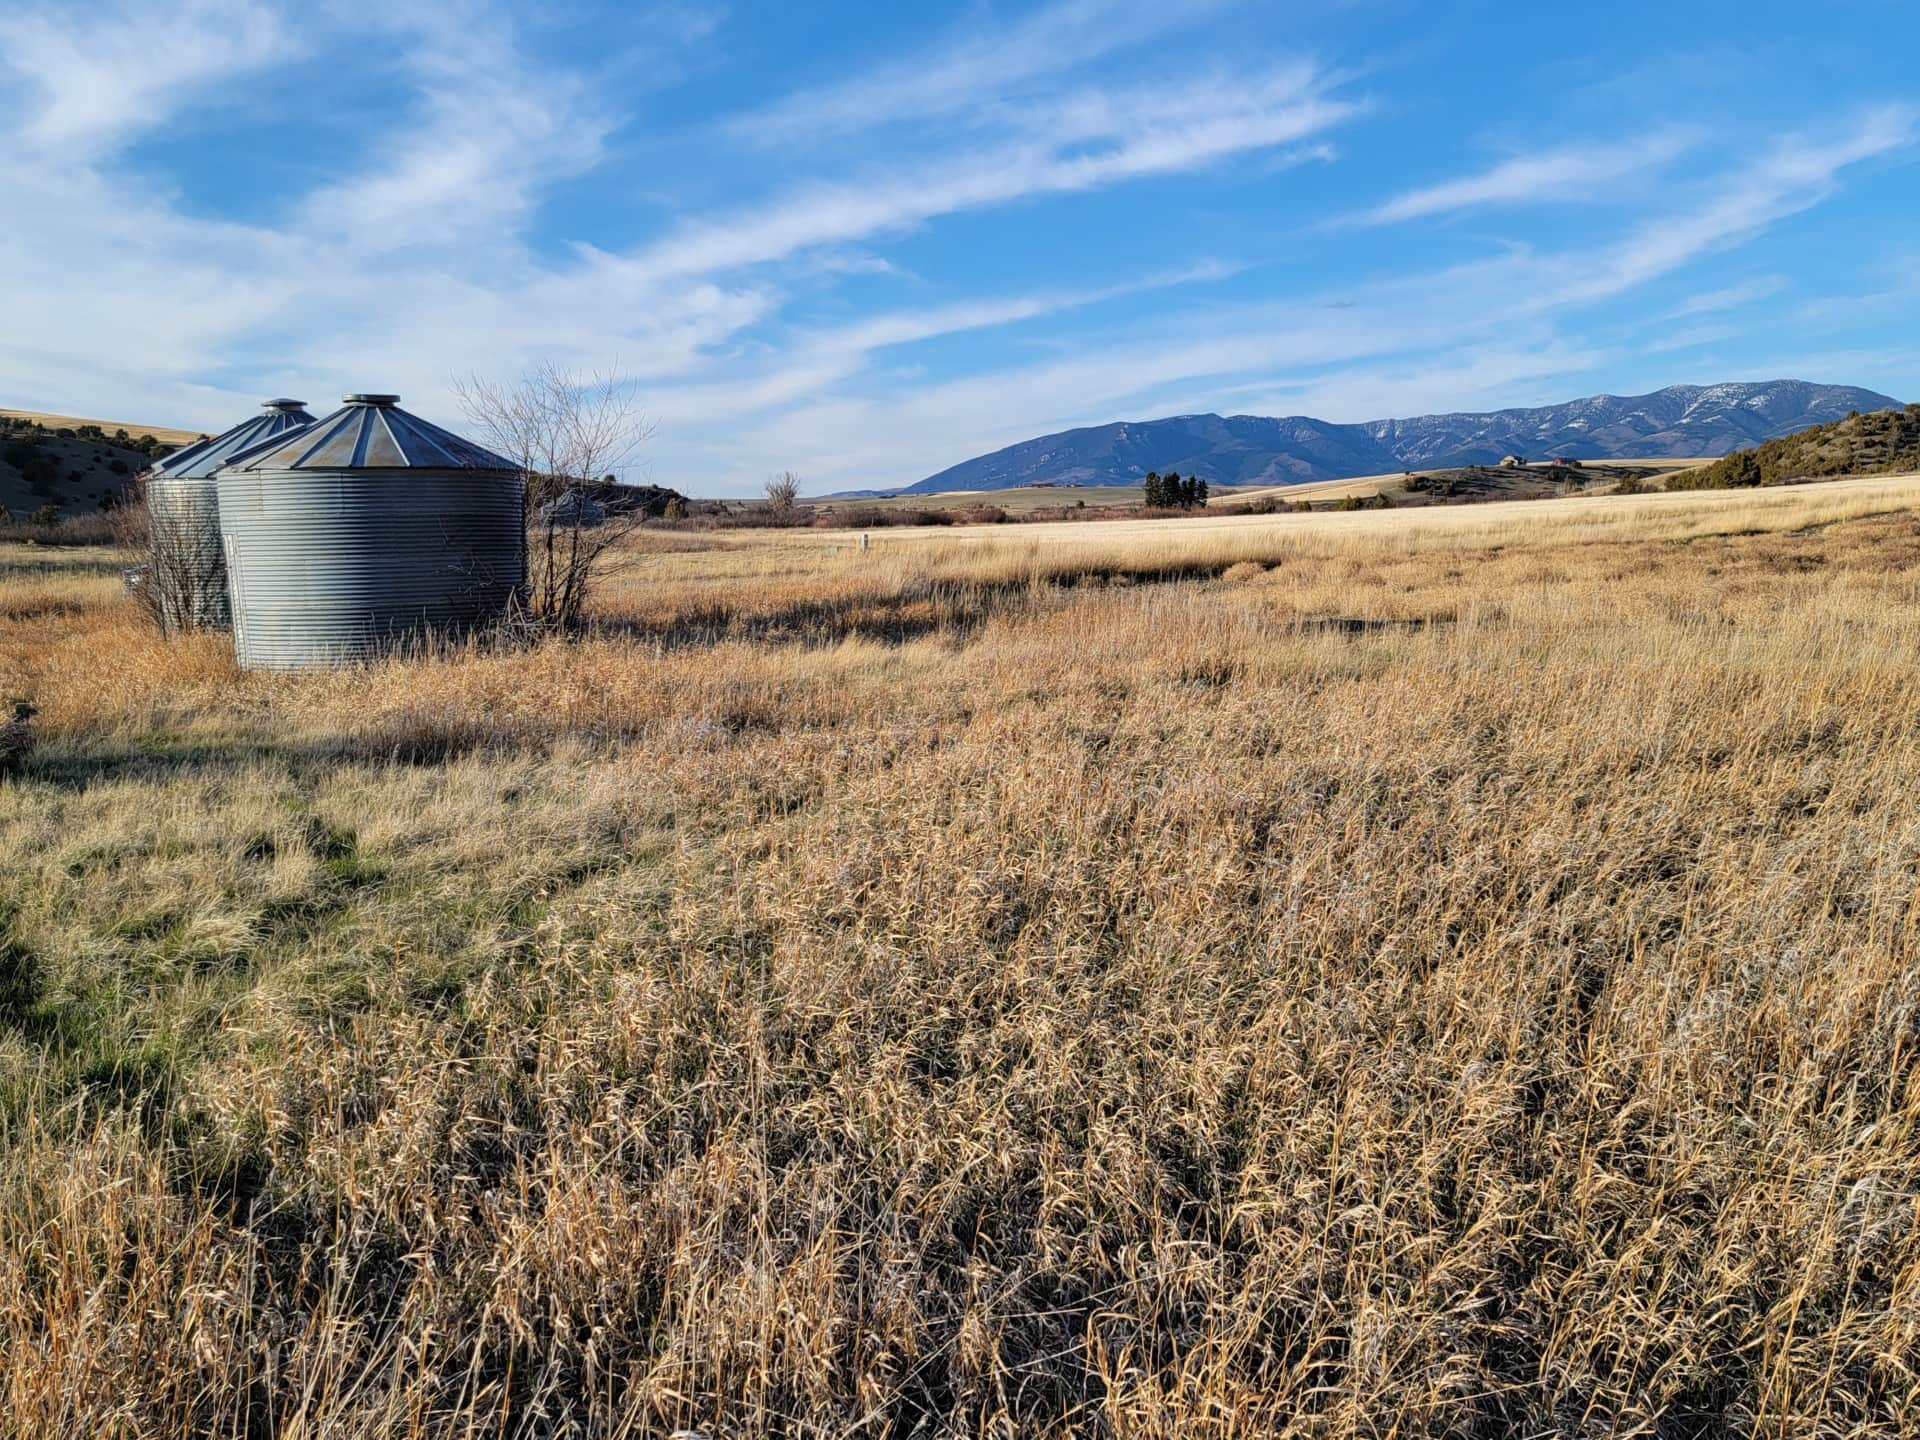 Gallatin Valley Property For Sale Montana Rocking S7 Ranch